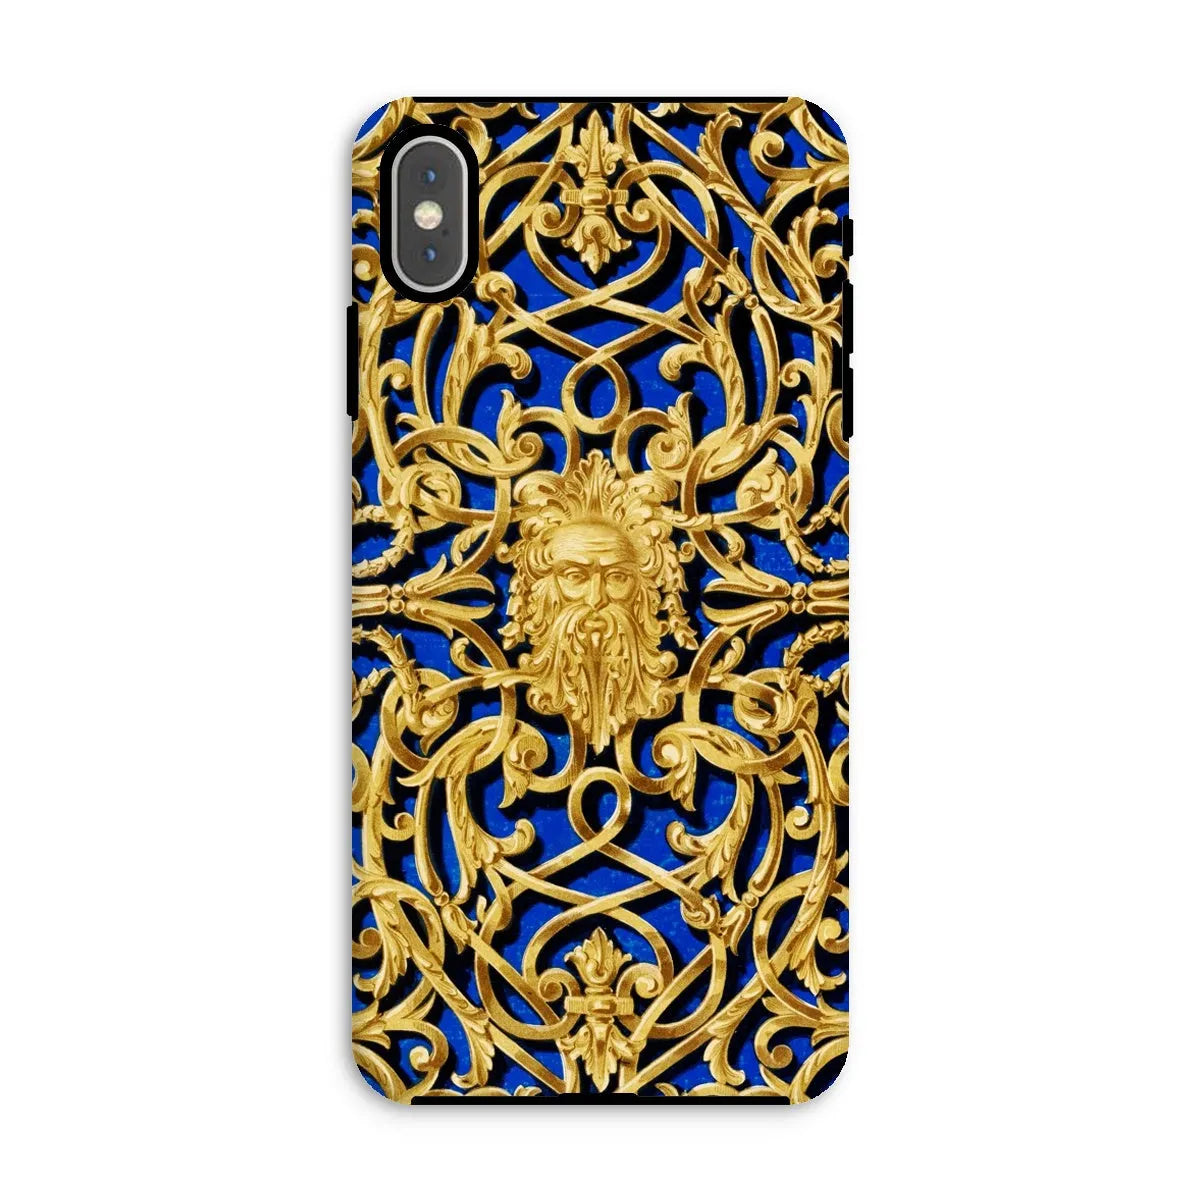 Gilded Gate Victorian Phone Case - Sir Matthew Digby Wyatt - Iphone Xs Max / Matte - Mobile Phone Cases - Aesthetic Art